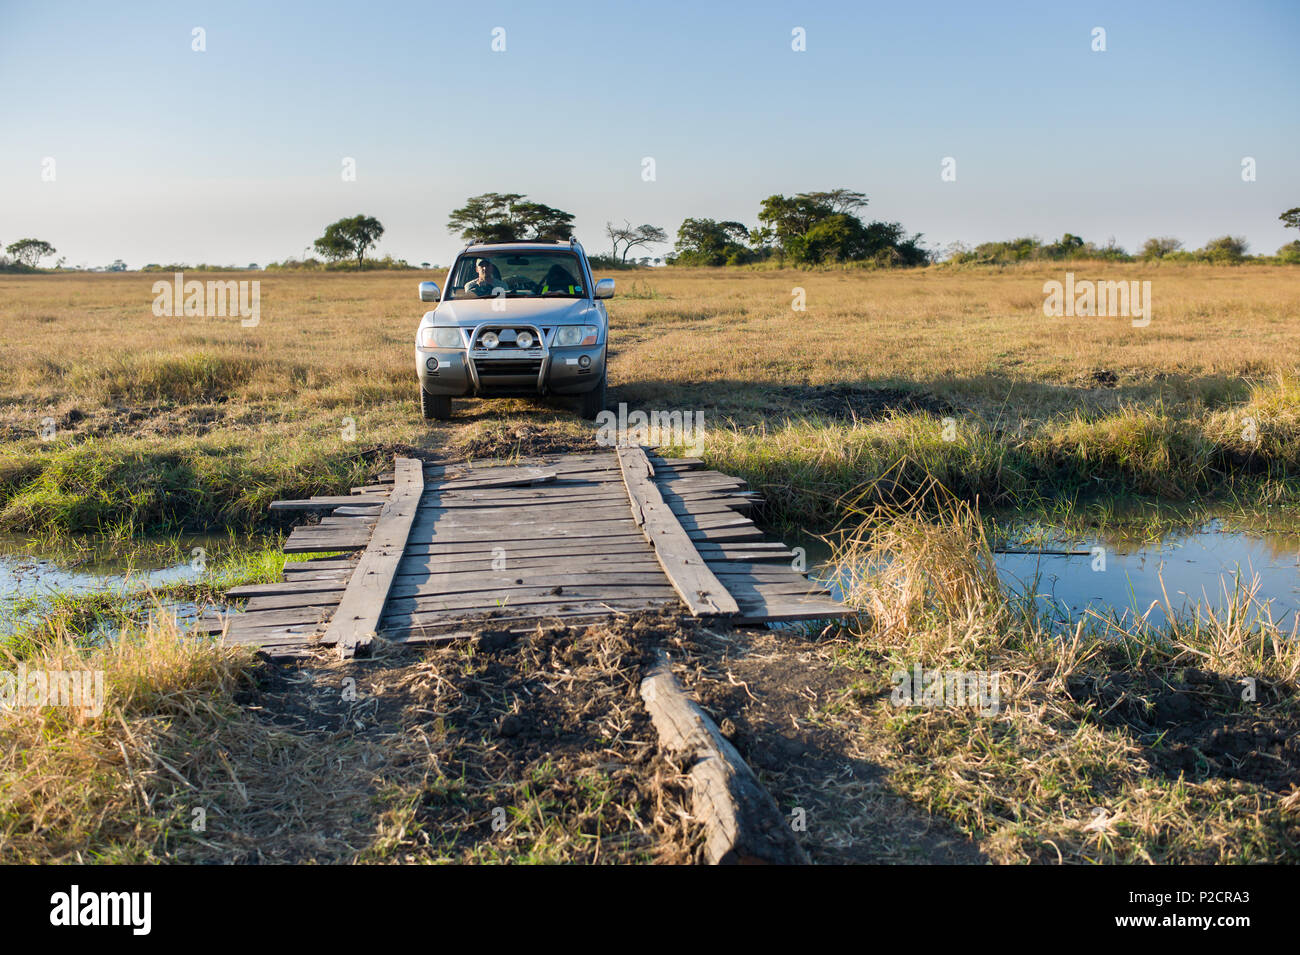 Silver 4x4 off road high clearance vehicle on self drive safari in Kafue National Park, Zambia. Stock Photo